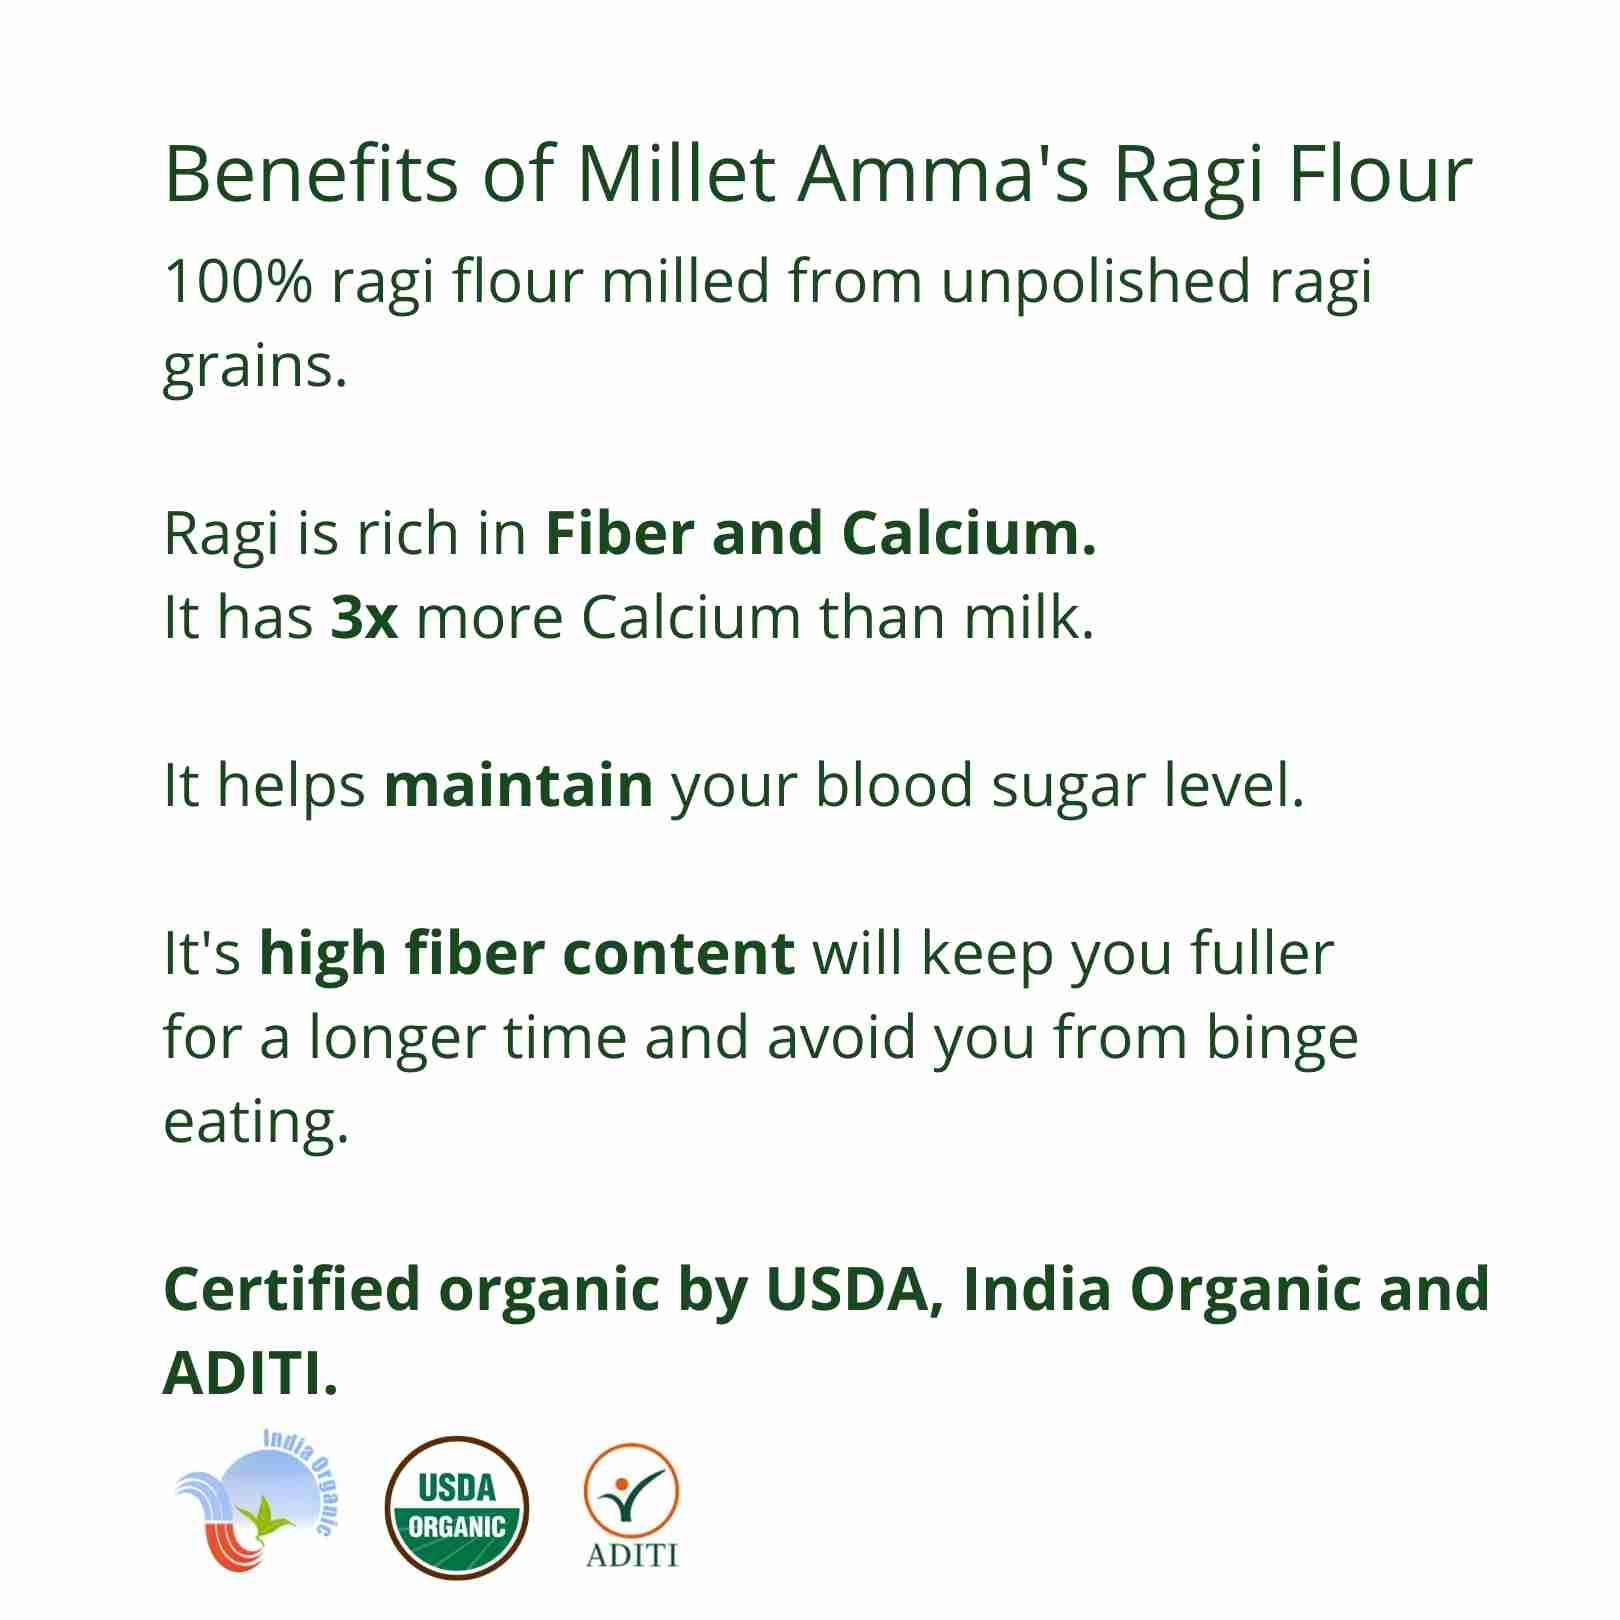 Millet Amma’s Organic Ragi Millet Flour- Millet Amma’s Organic Ragi Millet Flour is rich in fiber, minerals and amino acids.  Unpolished Ragi Millets are a good source of calcium and gives you 3x more calcium than milk.  Ragi Millet is an ideal option for reducing glucose levels, it is also loaded with antioxidants making it a natural relaxant.